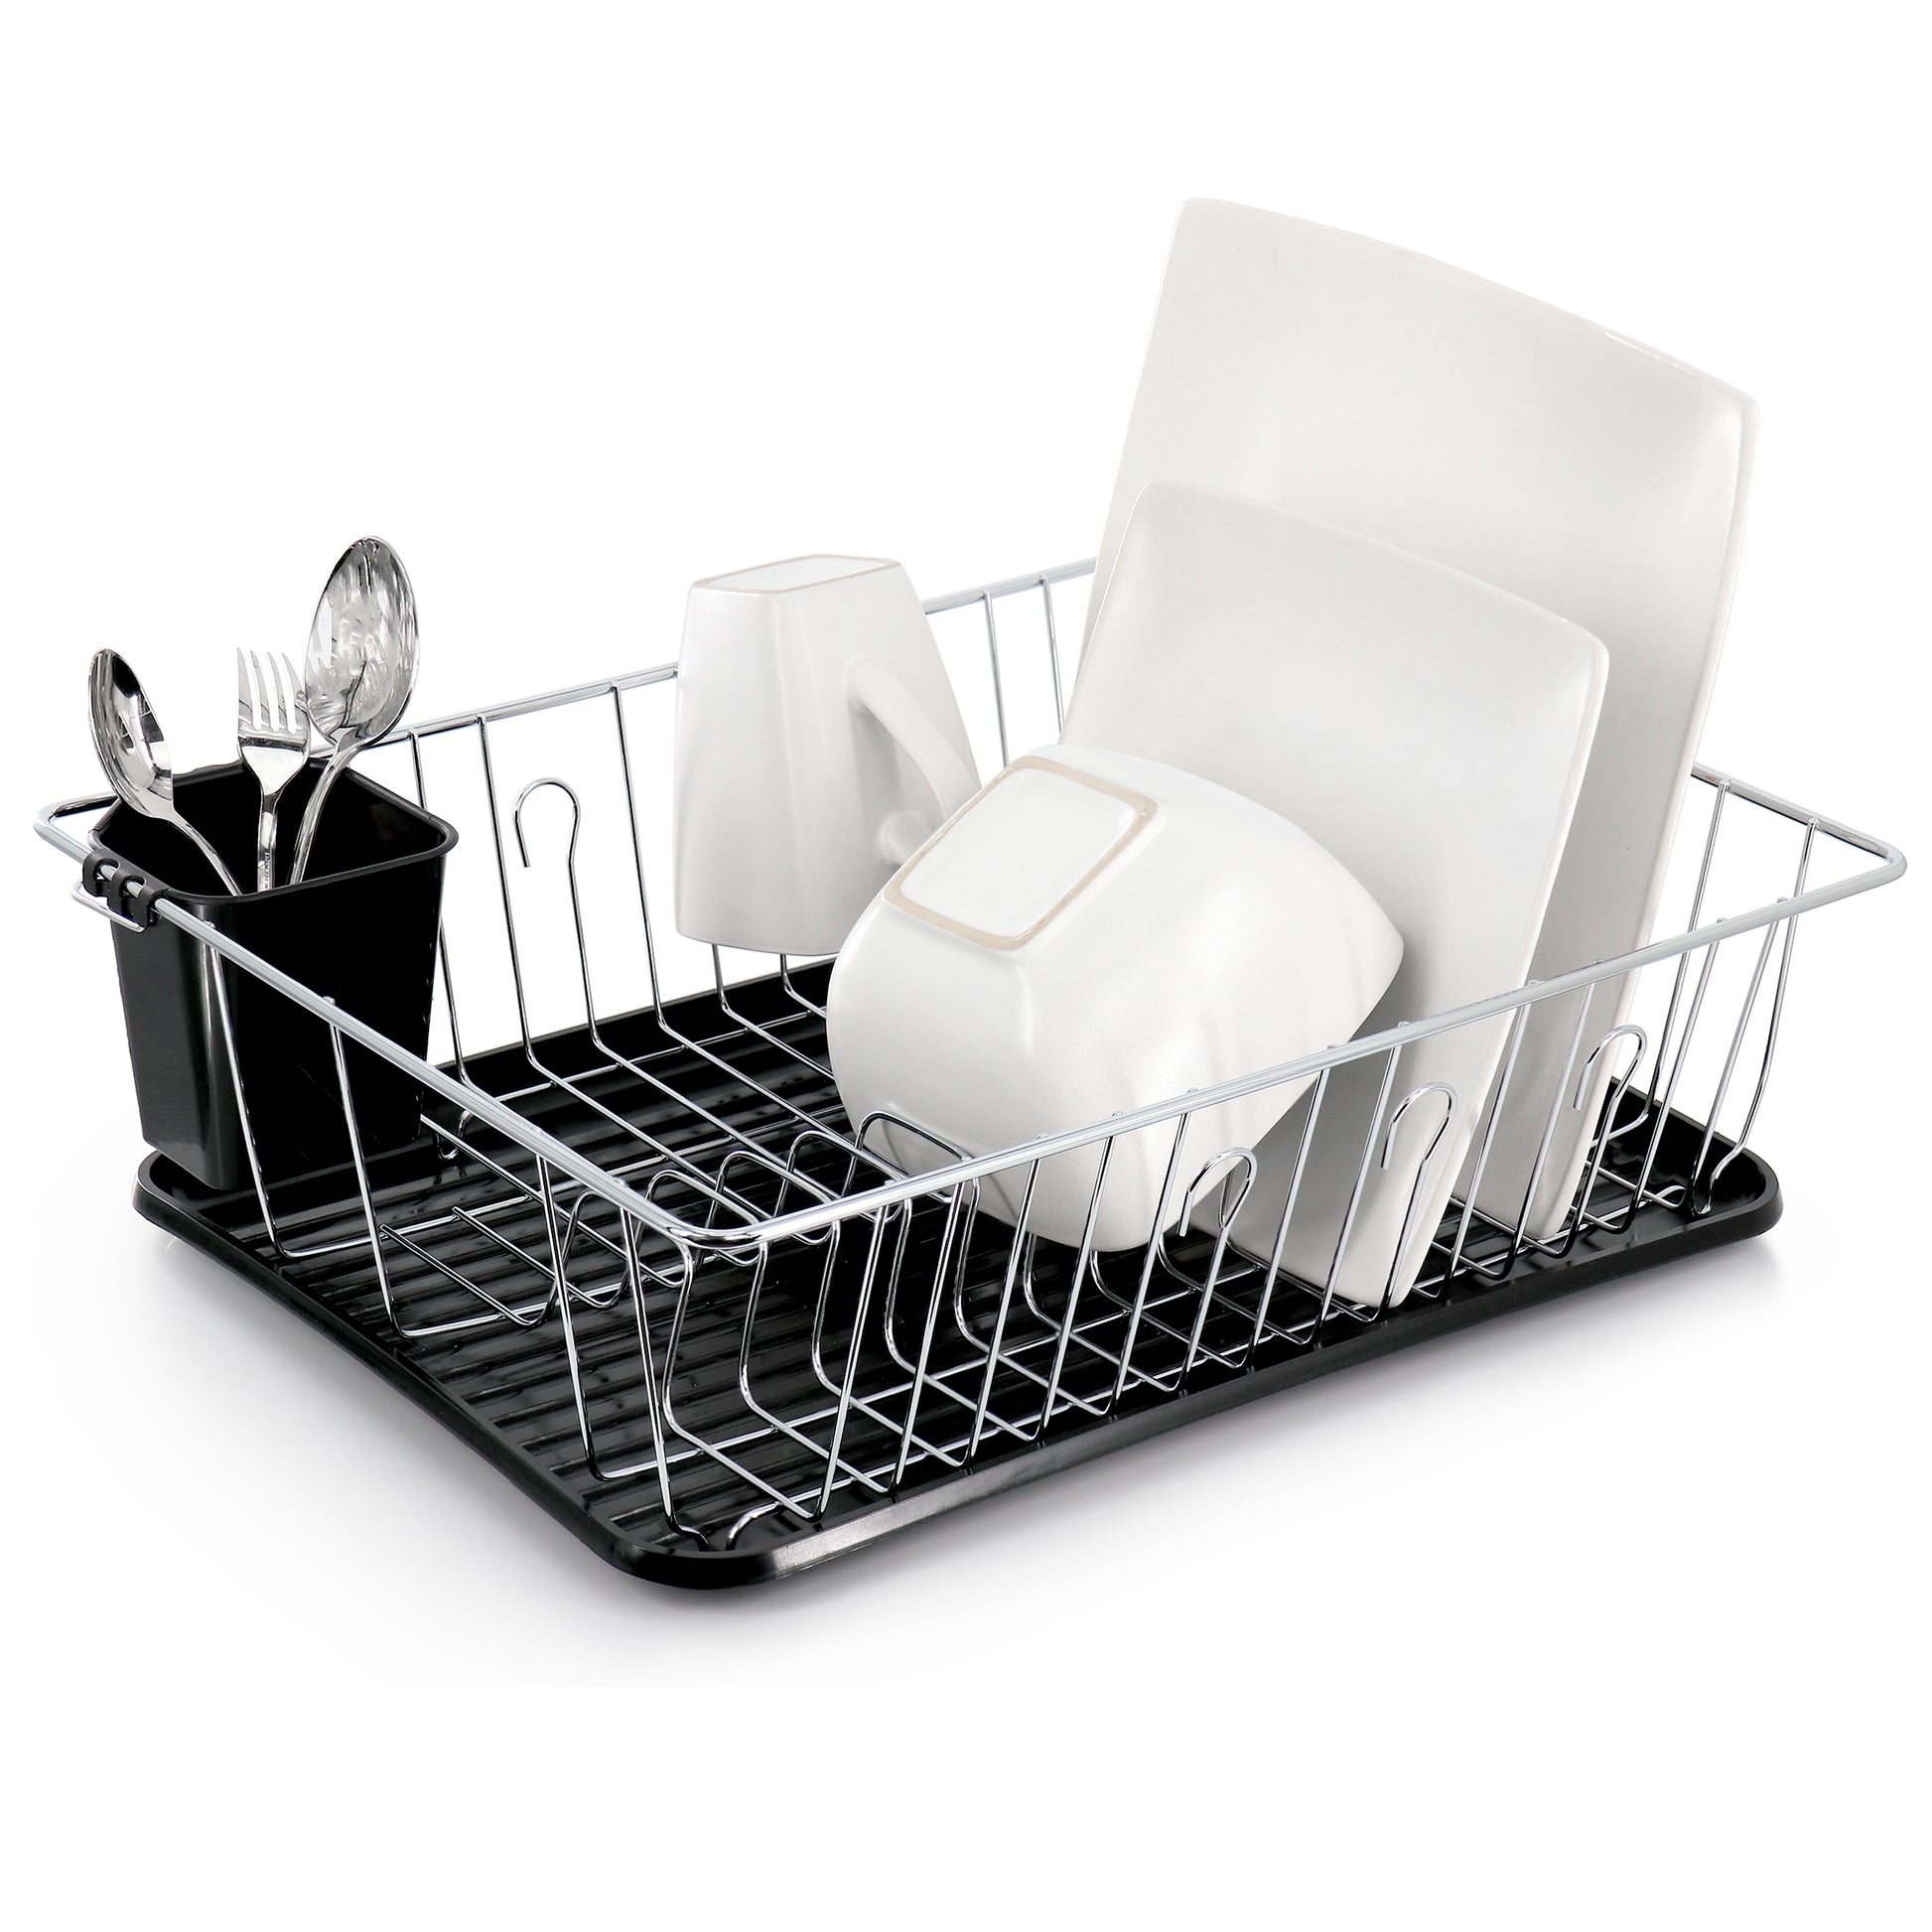 Megachef Megachef 16 Inch Chrome Plated and Plastic Counter Top Drying Dish Rack in Black